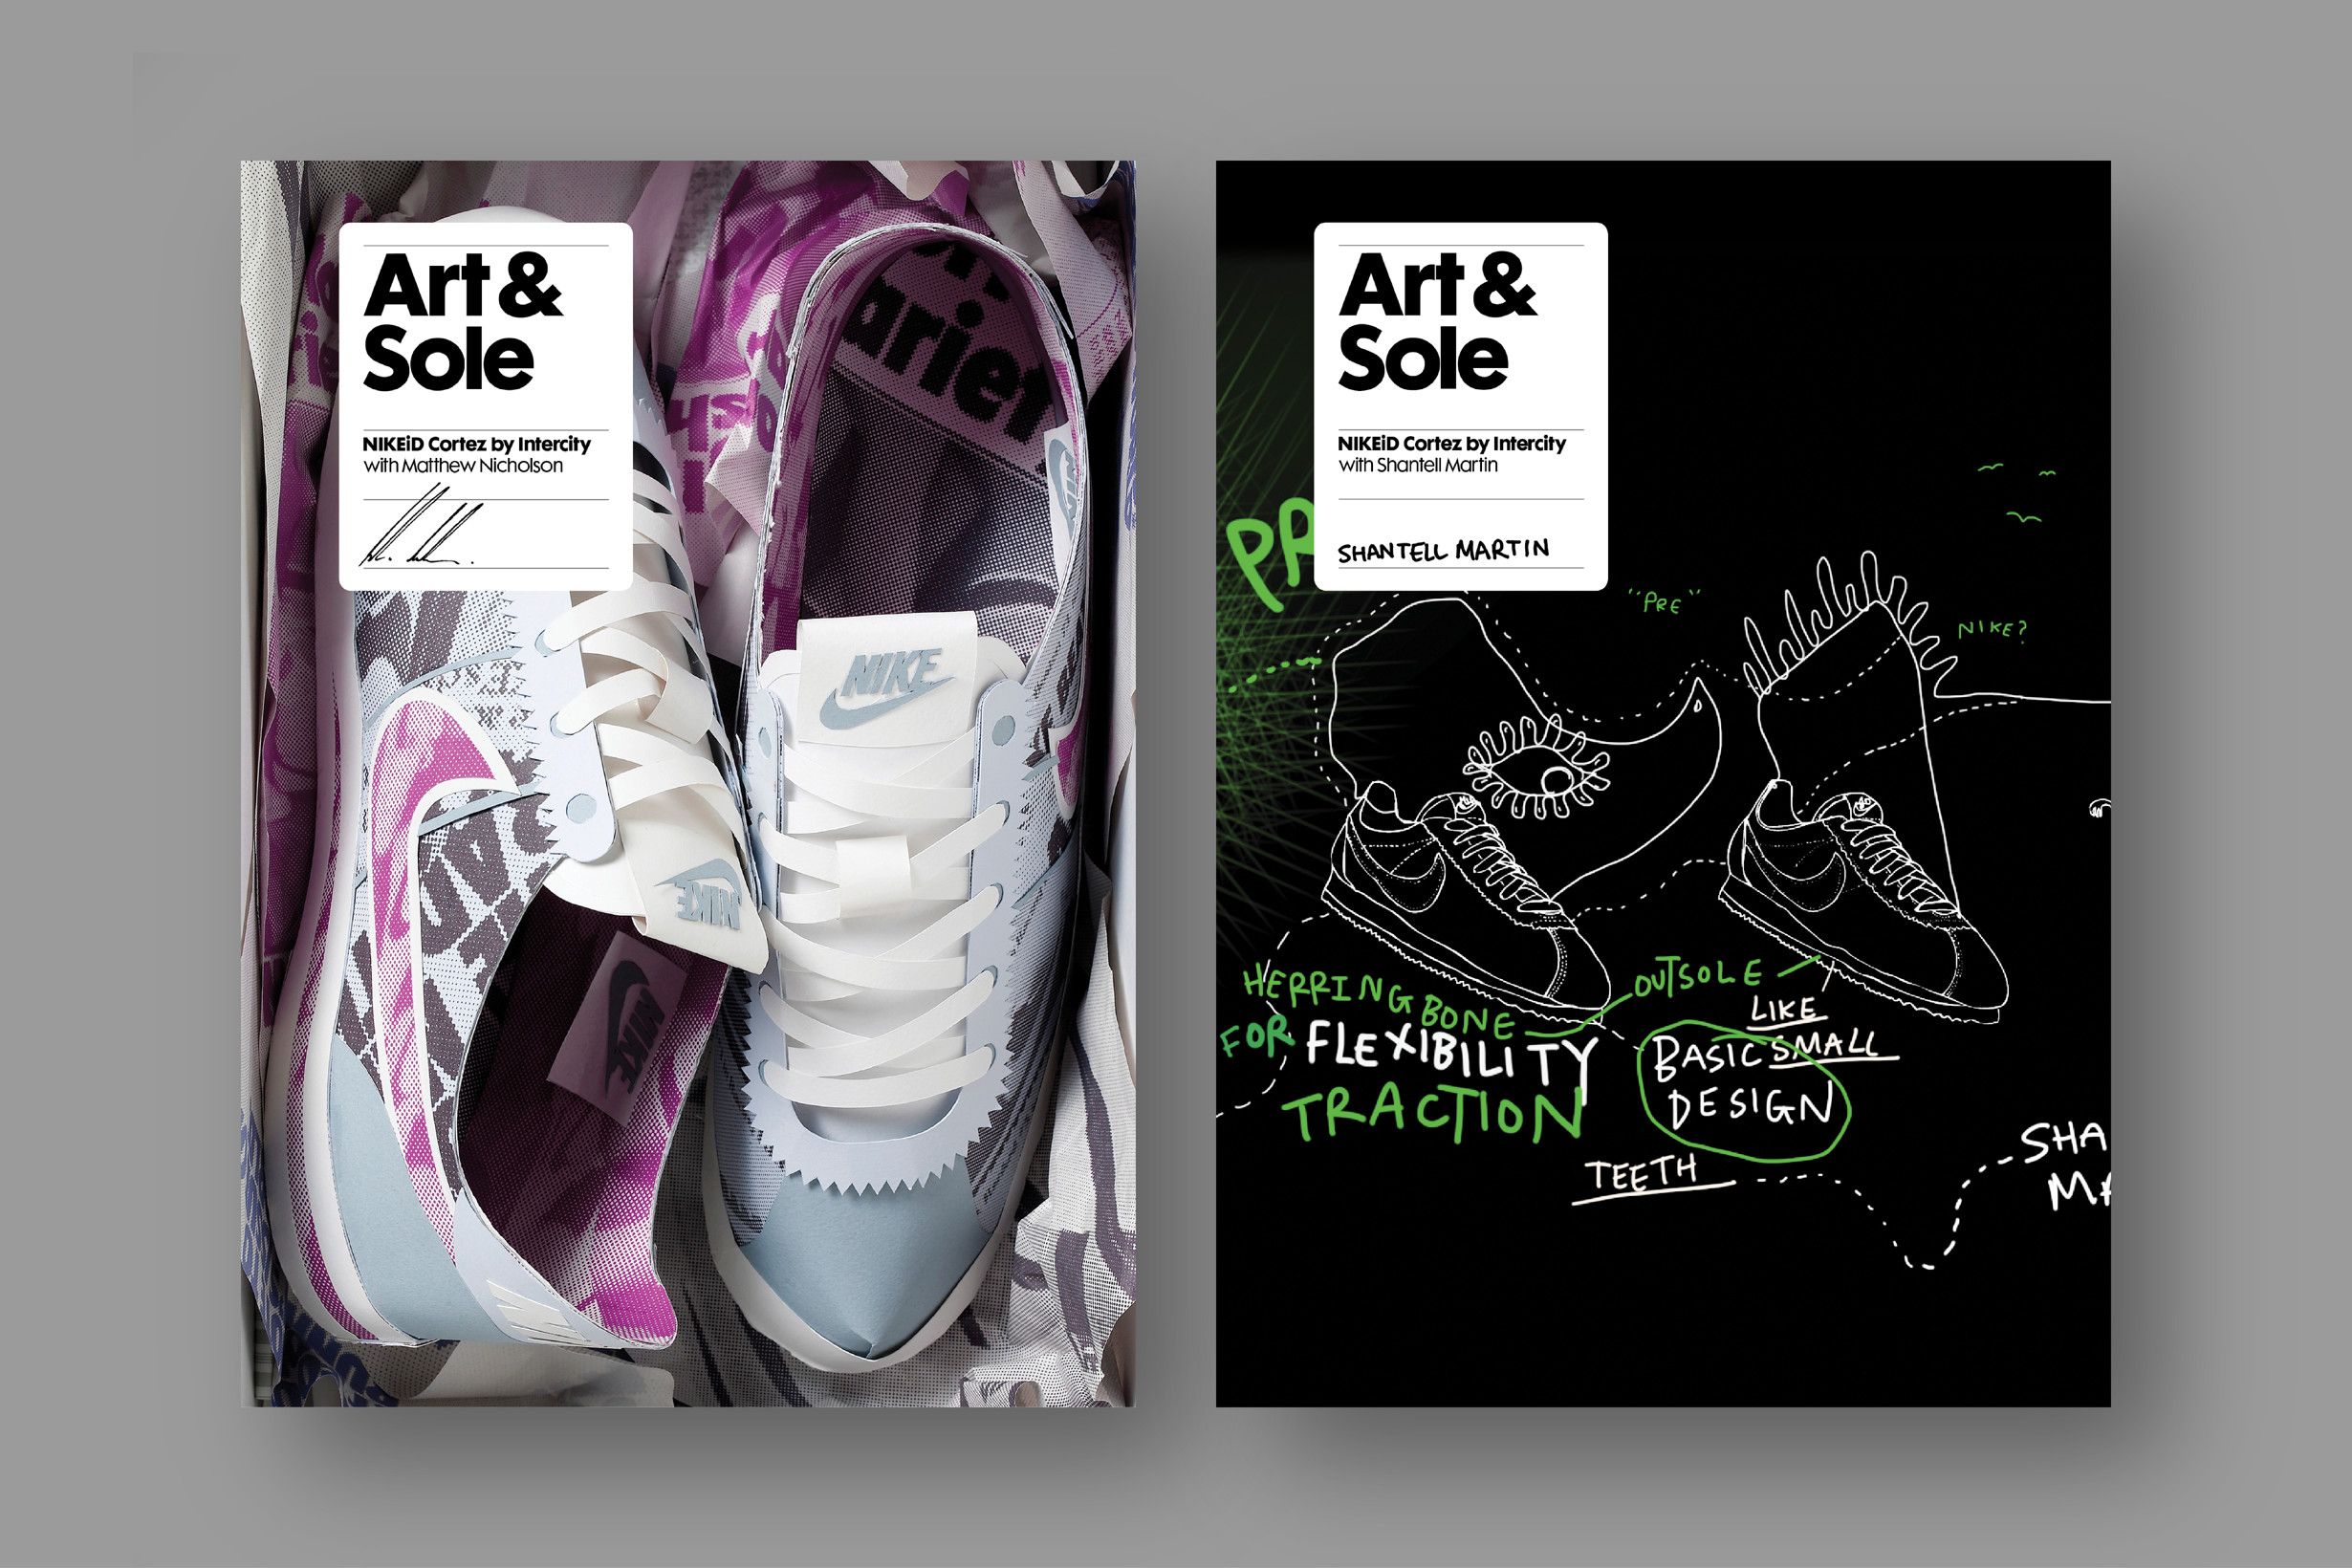 Intercity Nike Art Sole Cortez Id Book Covers With Matthew